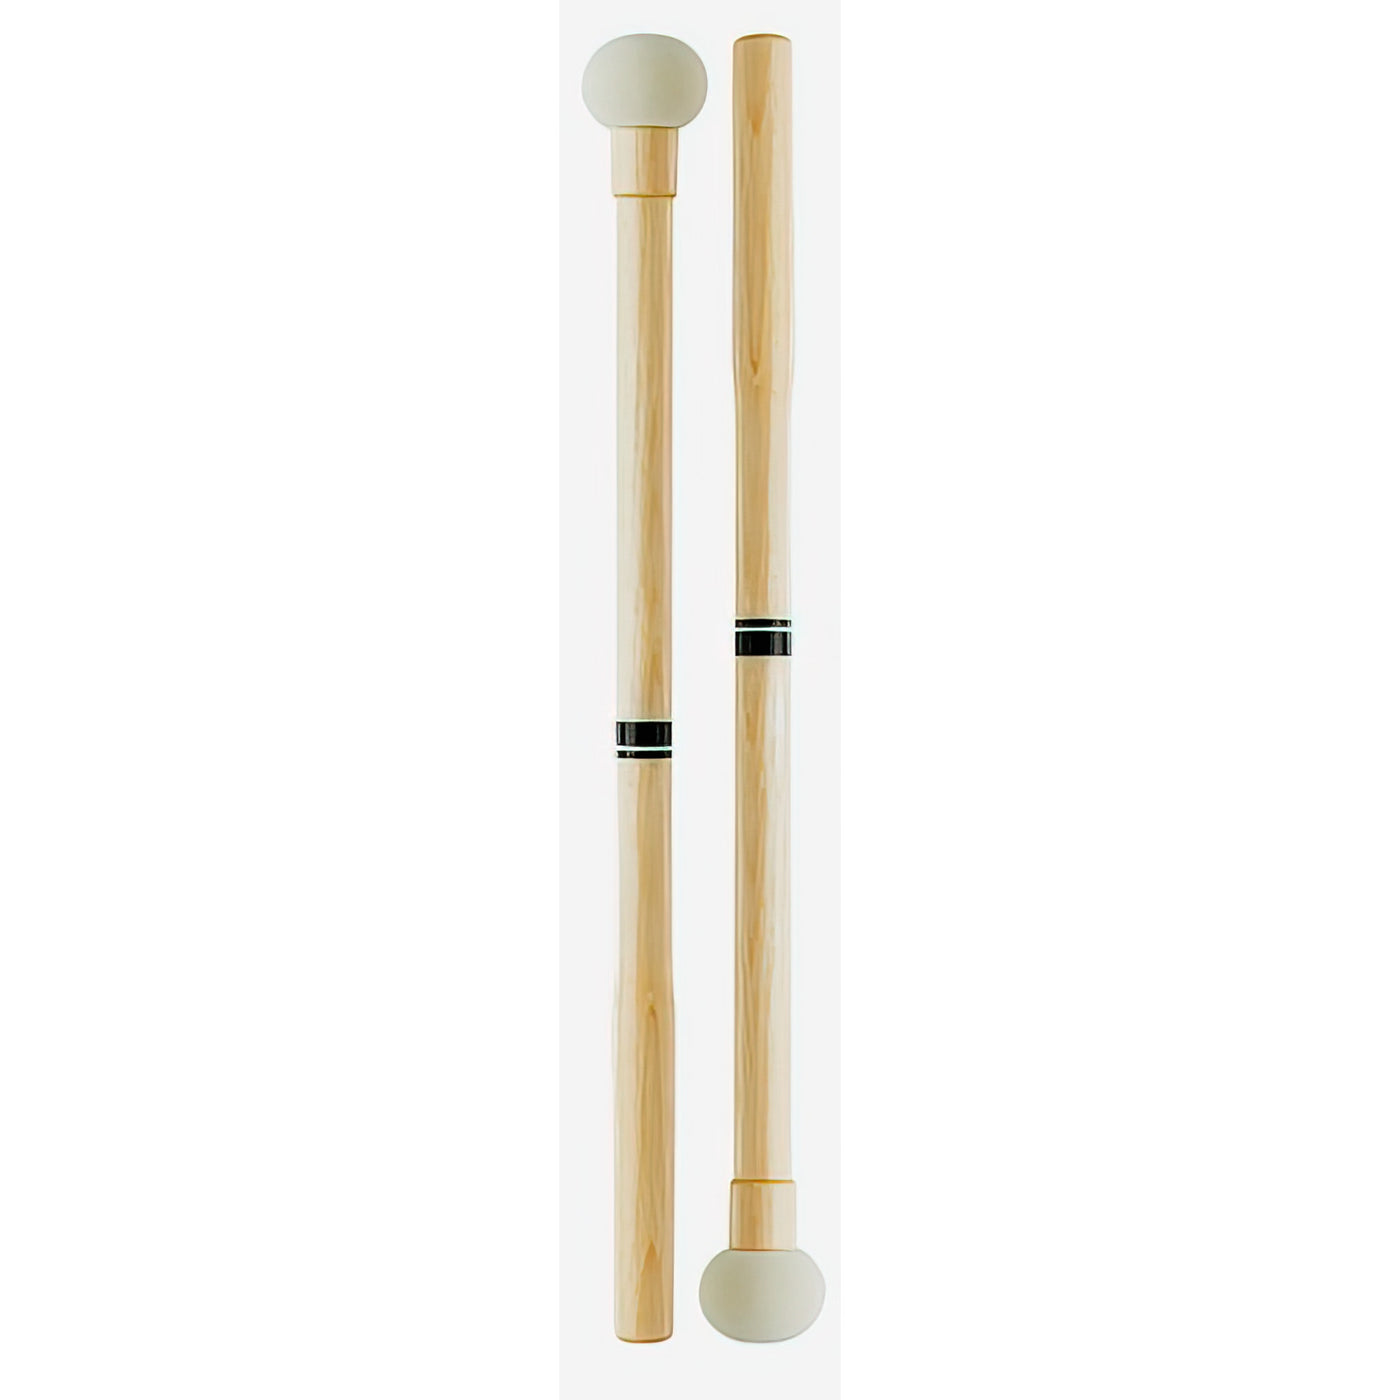 ProMark Optima Bass Drum Series Marching Mallets, 1-3/8" (OBD1)